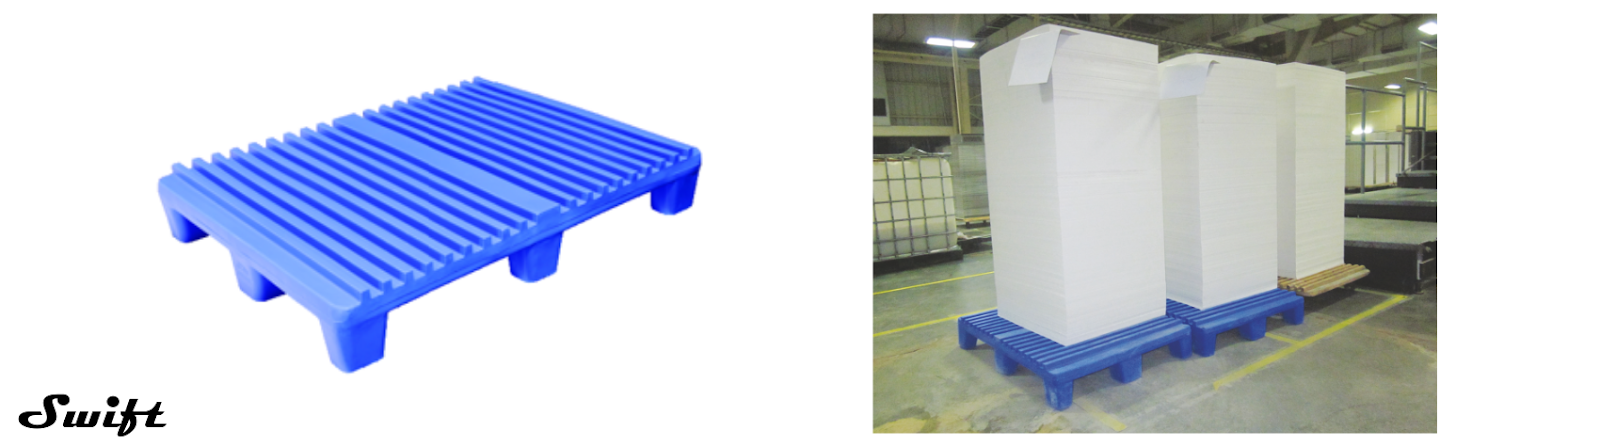 Printing and Packaging pallet used in paper industry for efficient operations.